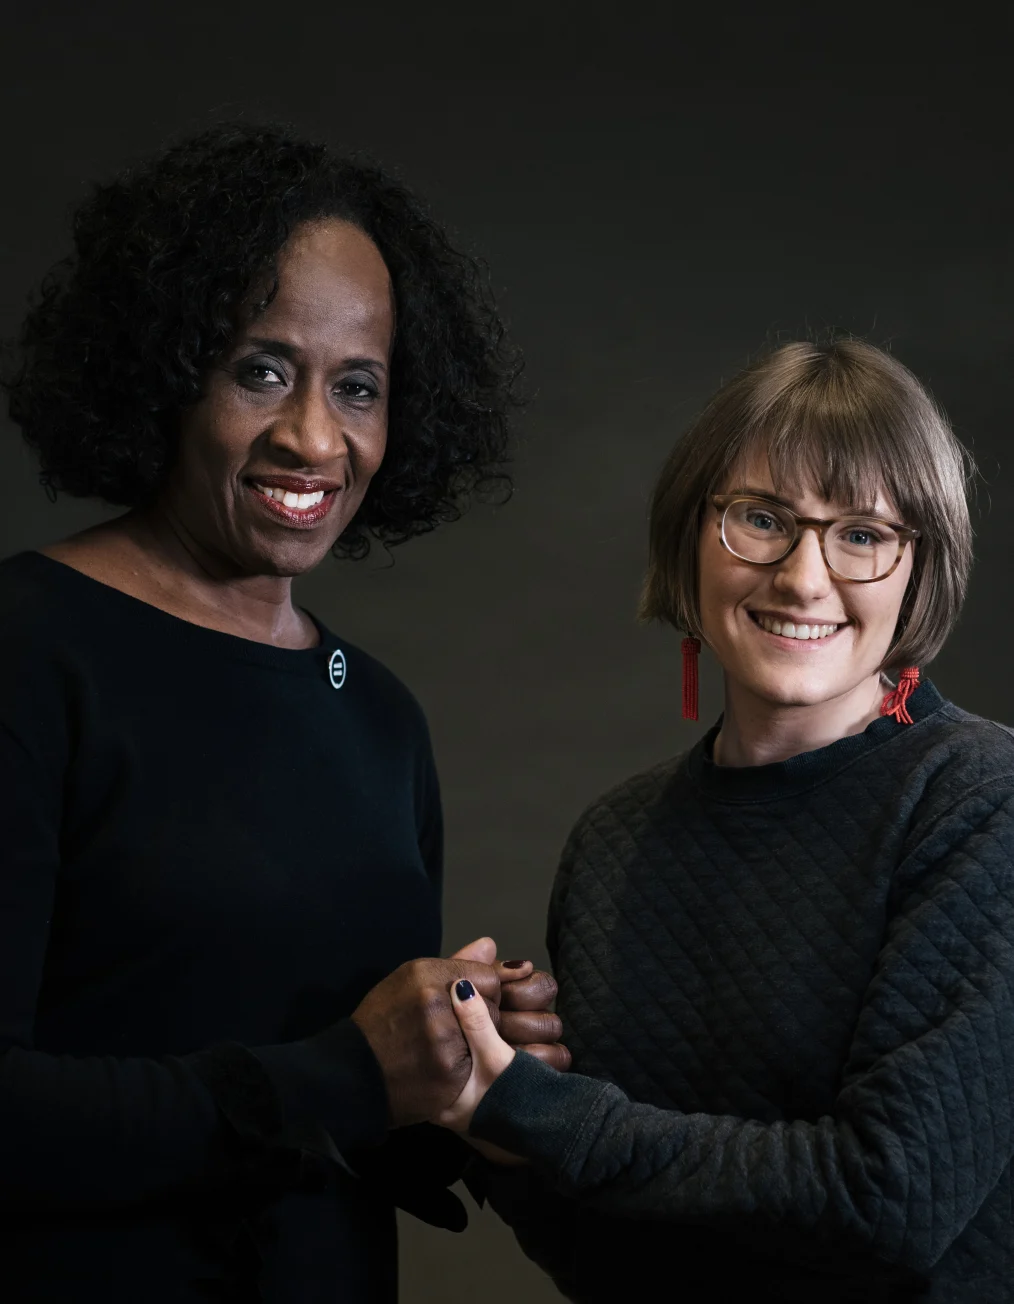 This picture shows two women with different skin tones grasping each other's hands and
smiling at the camera. One lady's skin tone is deep, while the other's is light.